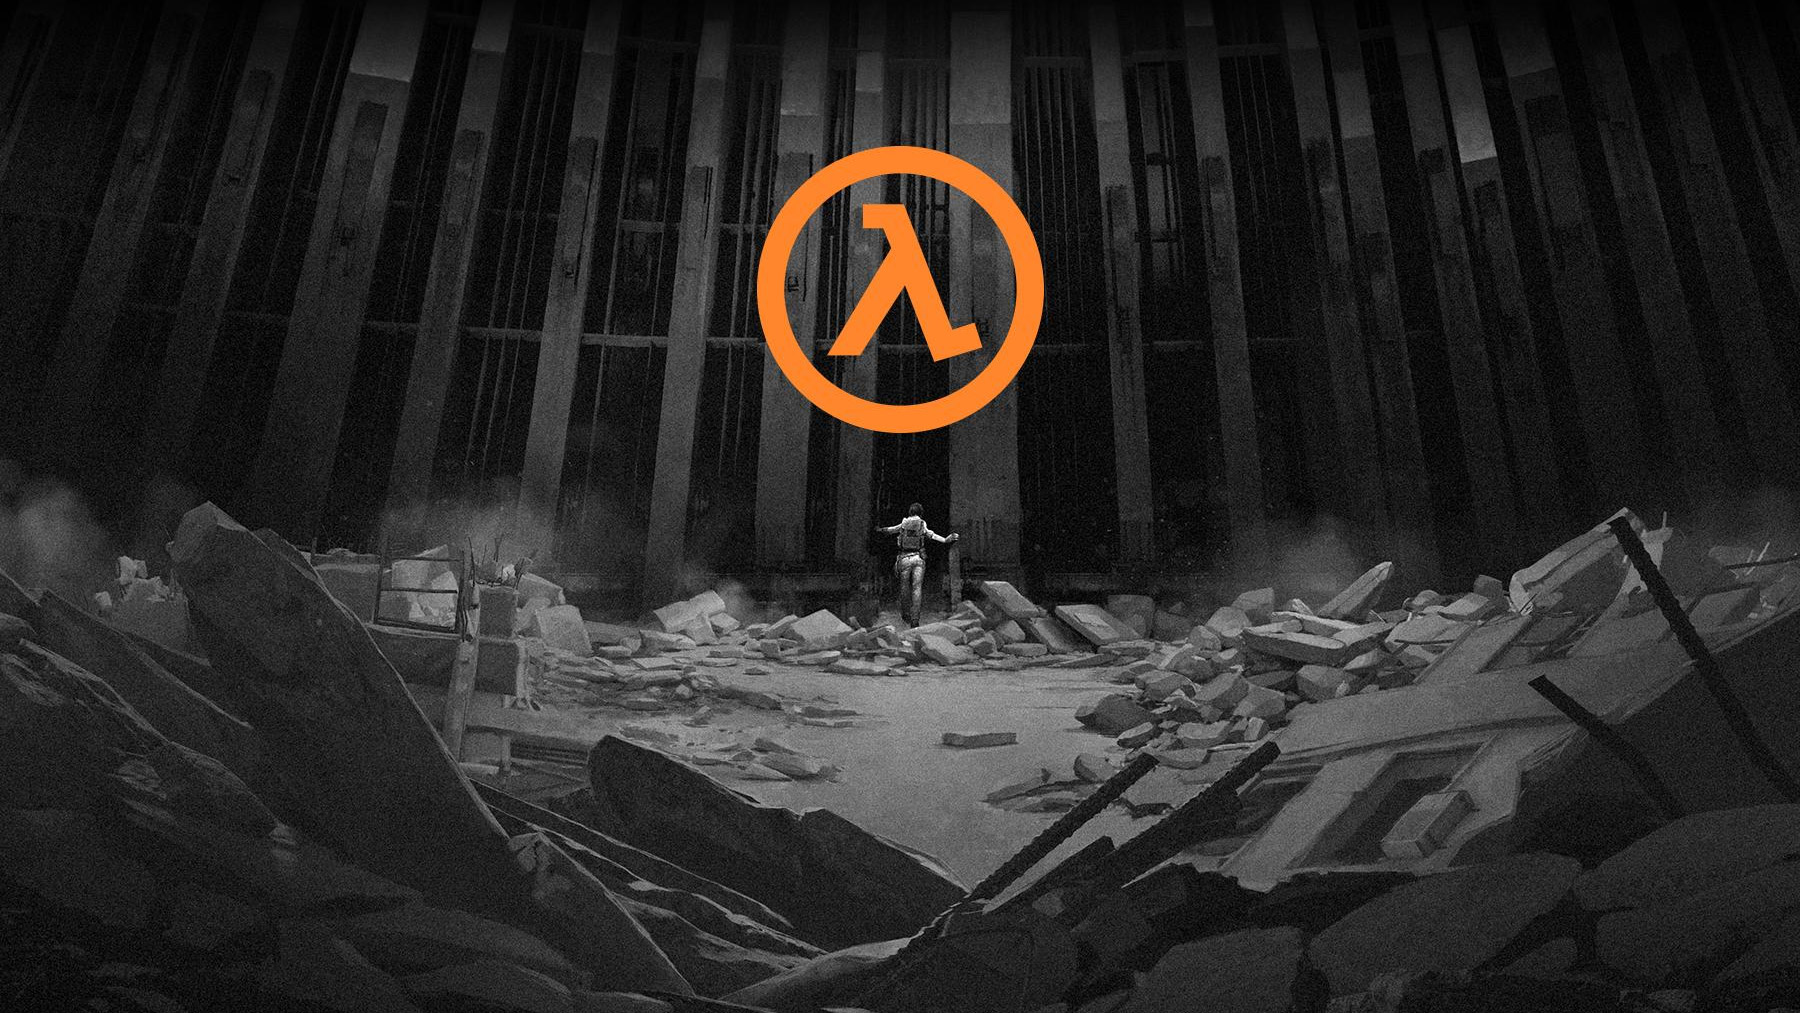 half life alyx recommended vr